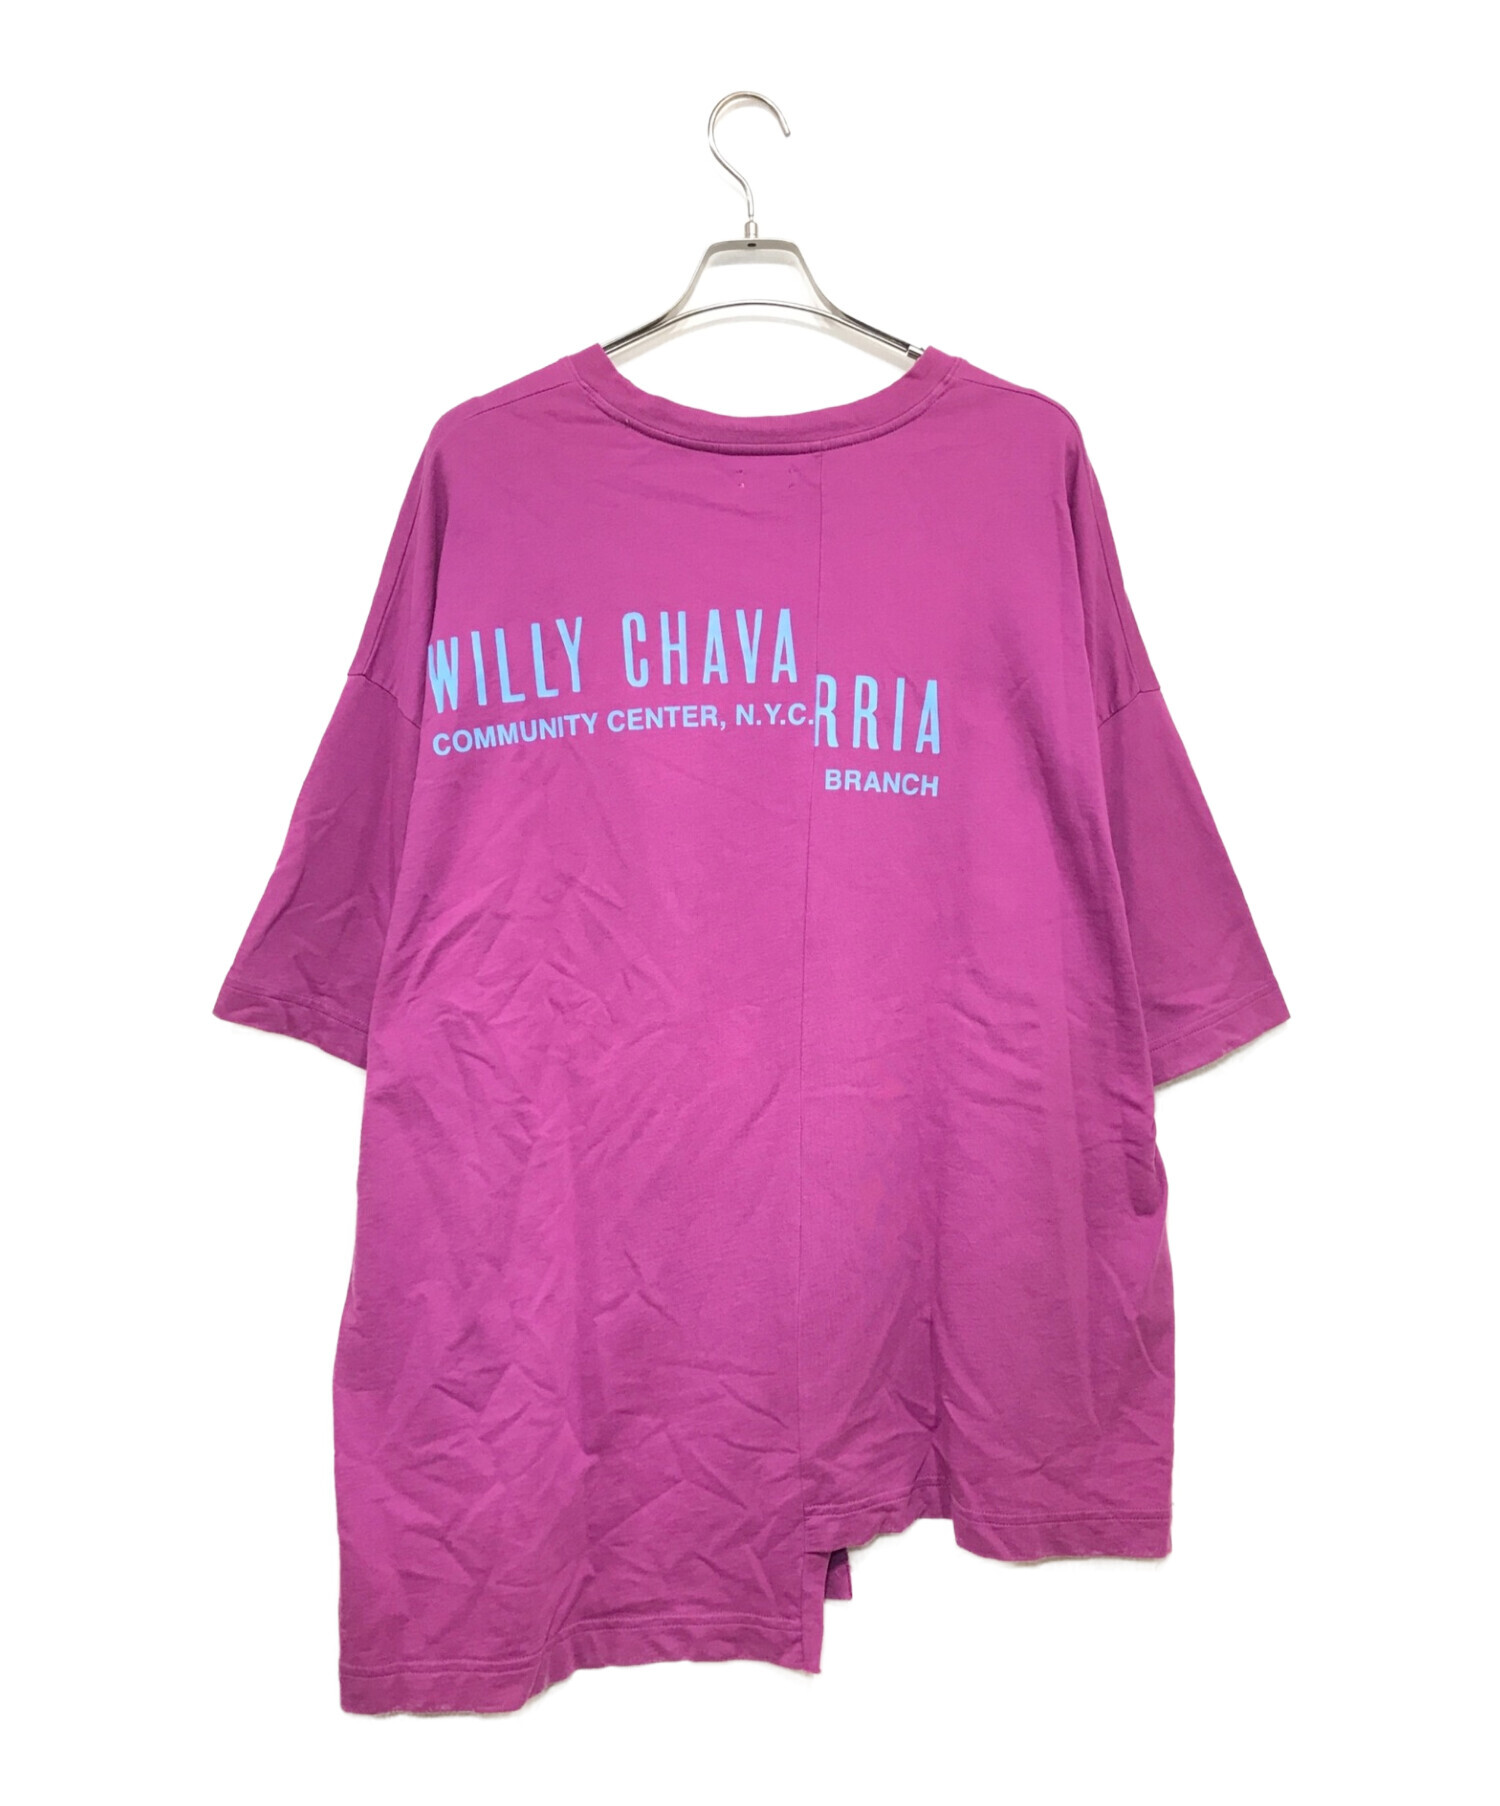 WILLY CHAVARRIA (ウィリーチャバリア) BIG WILLY PANEL T MIND BLOWER Tシャツ パープル サイズ:L